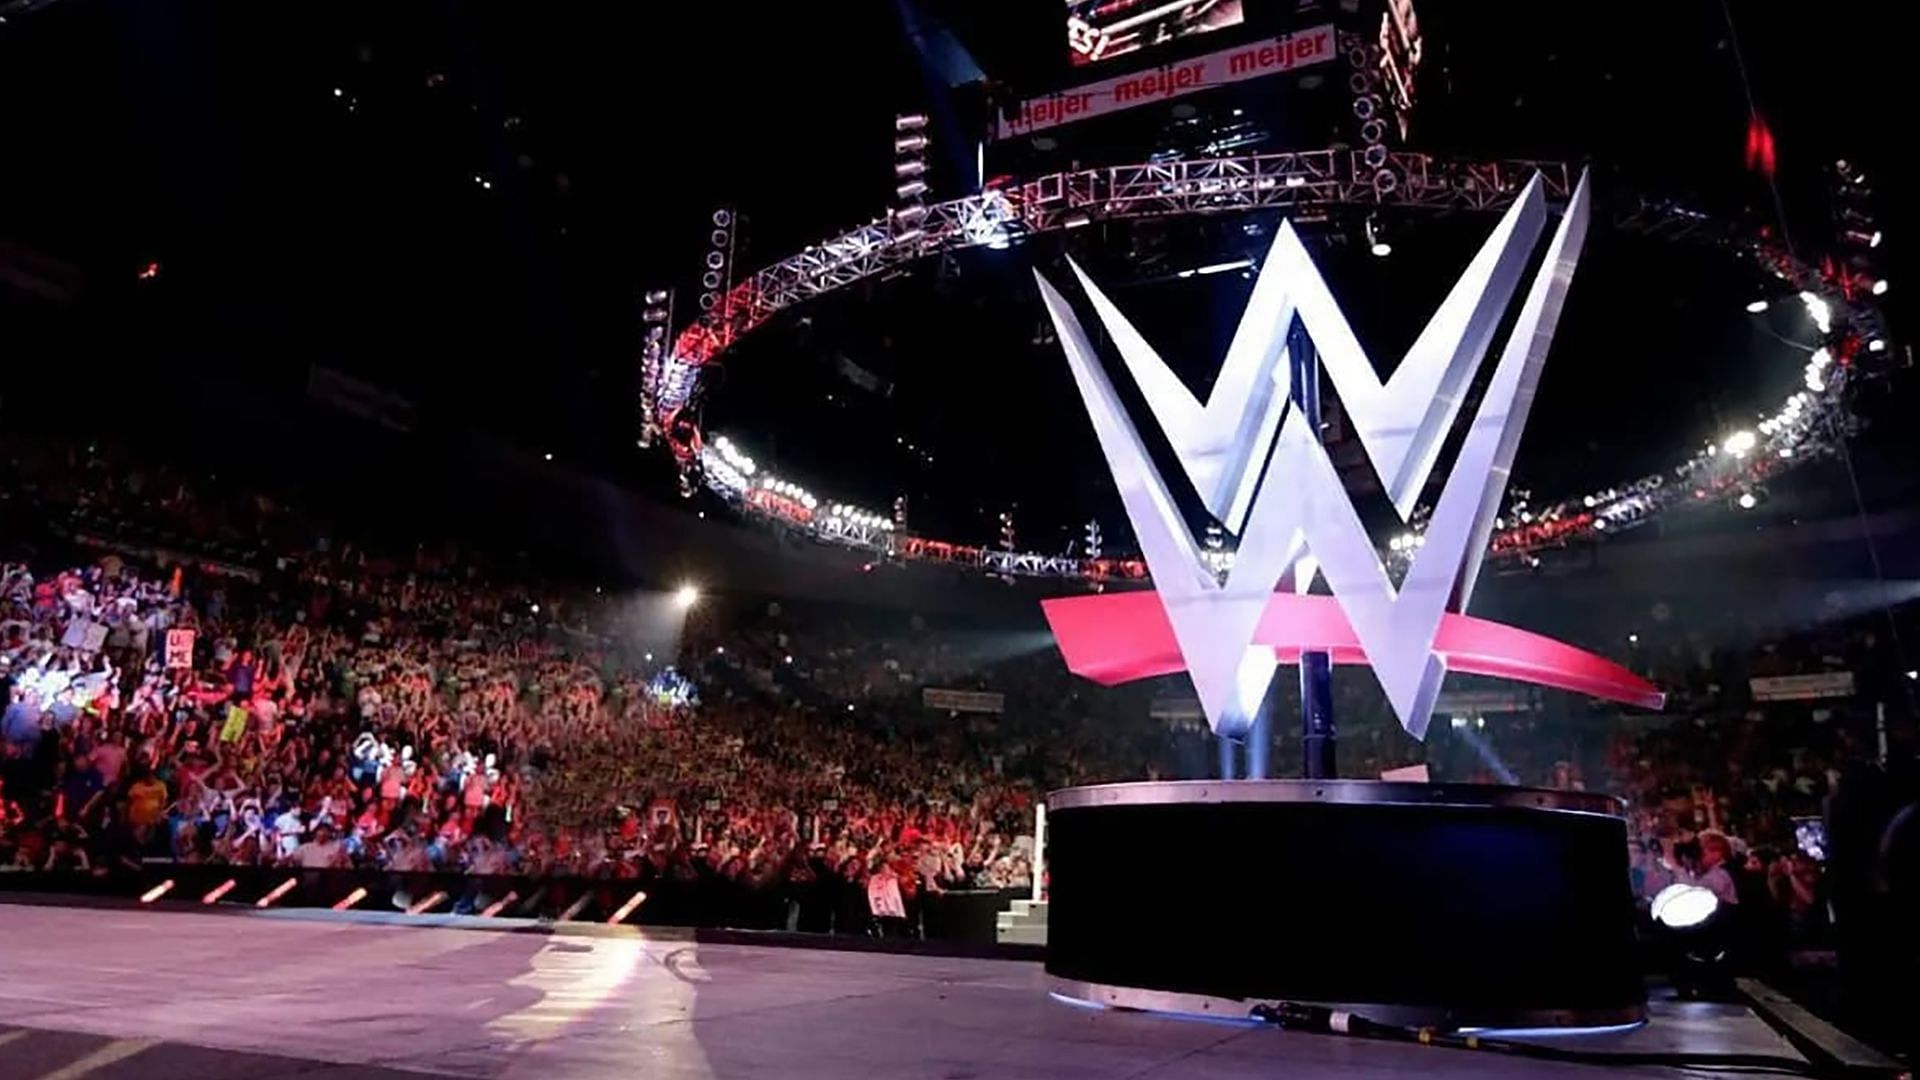 The WWE logo on display during a live RAW episode